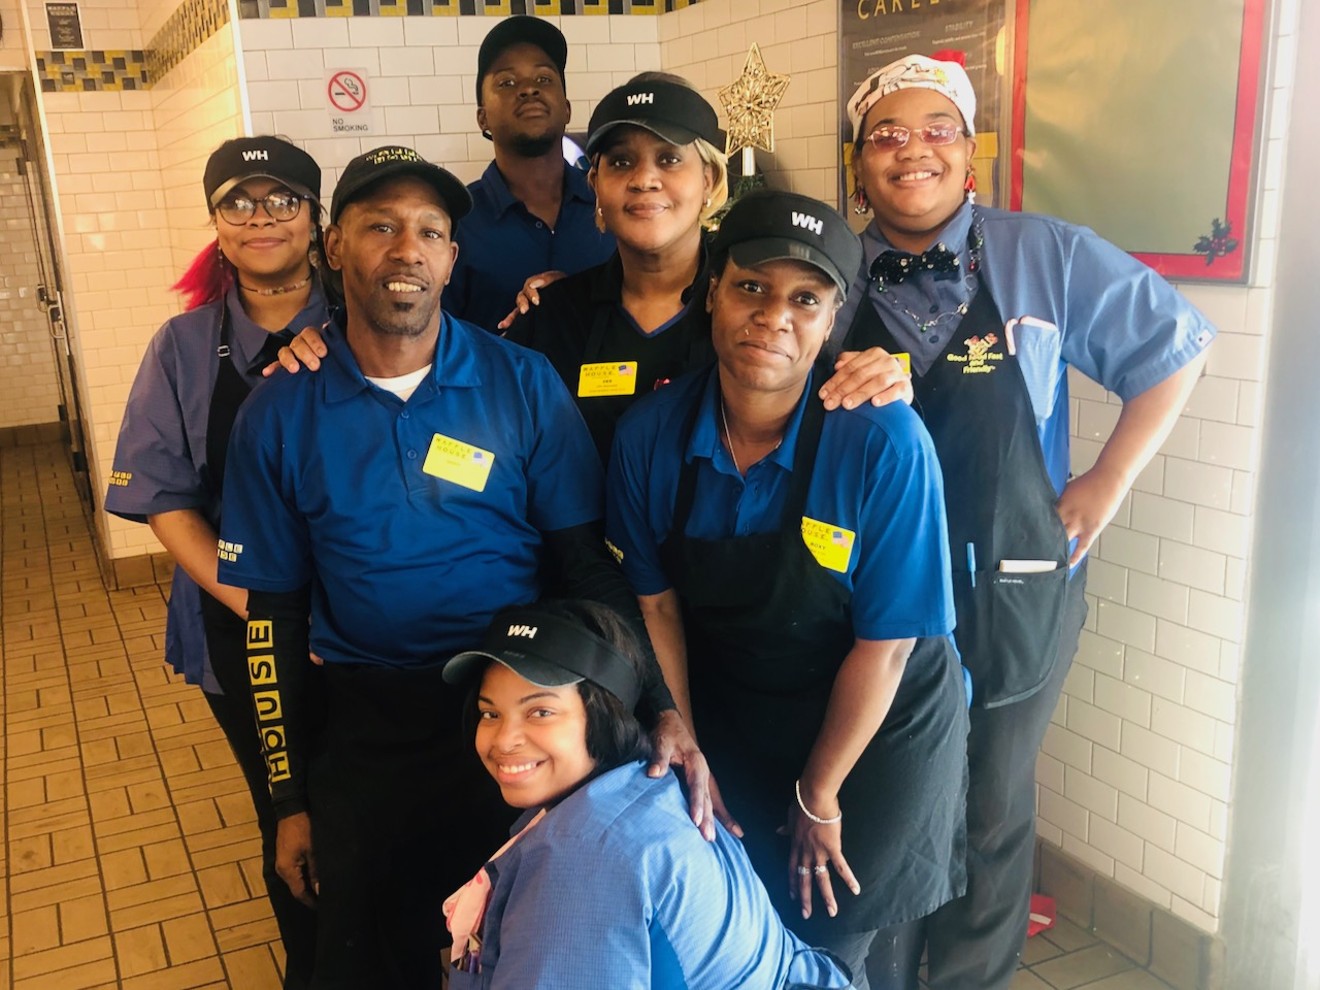 The crew at Waffle House 206 on South Cooper in Arlington. You'll see most of these smiling faces there on Christmas Day.